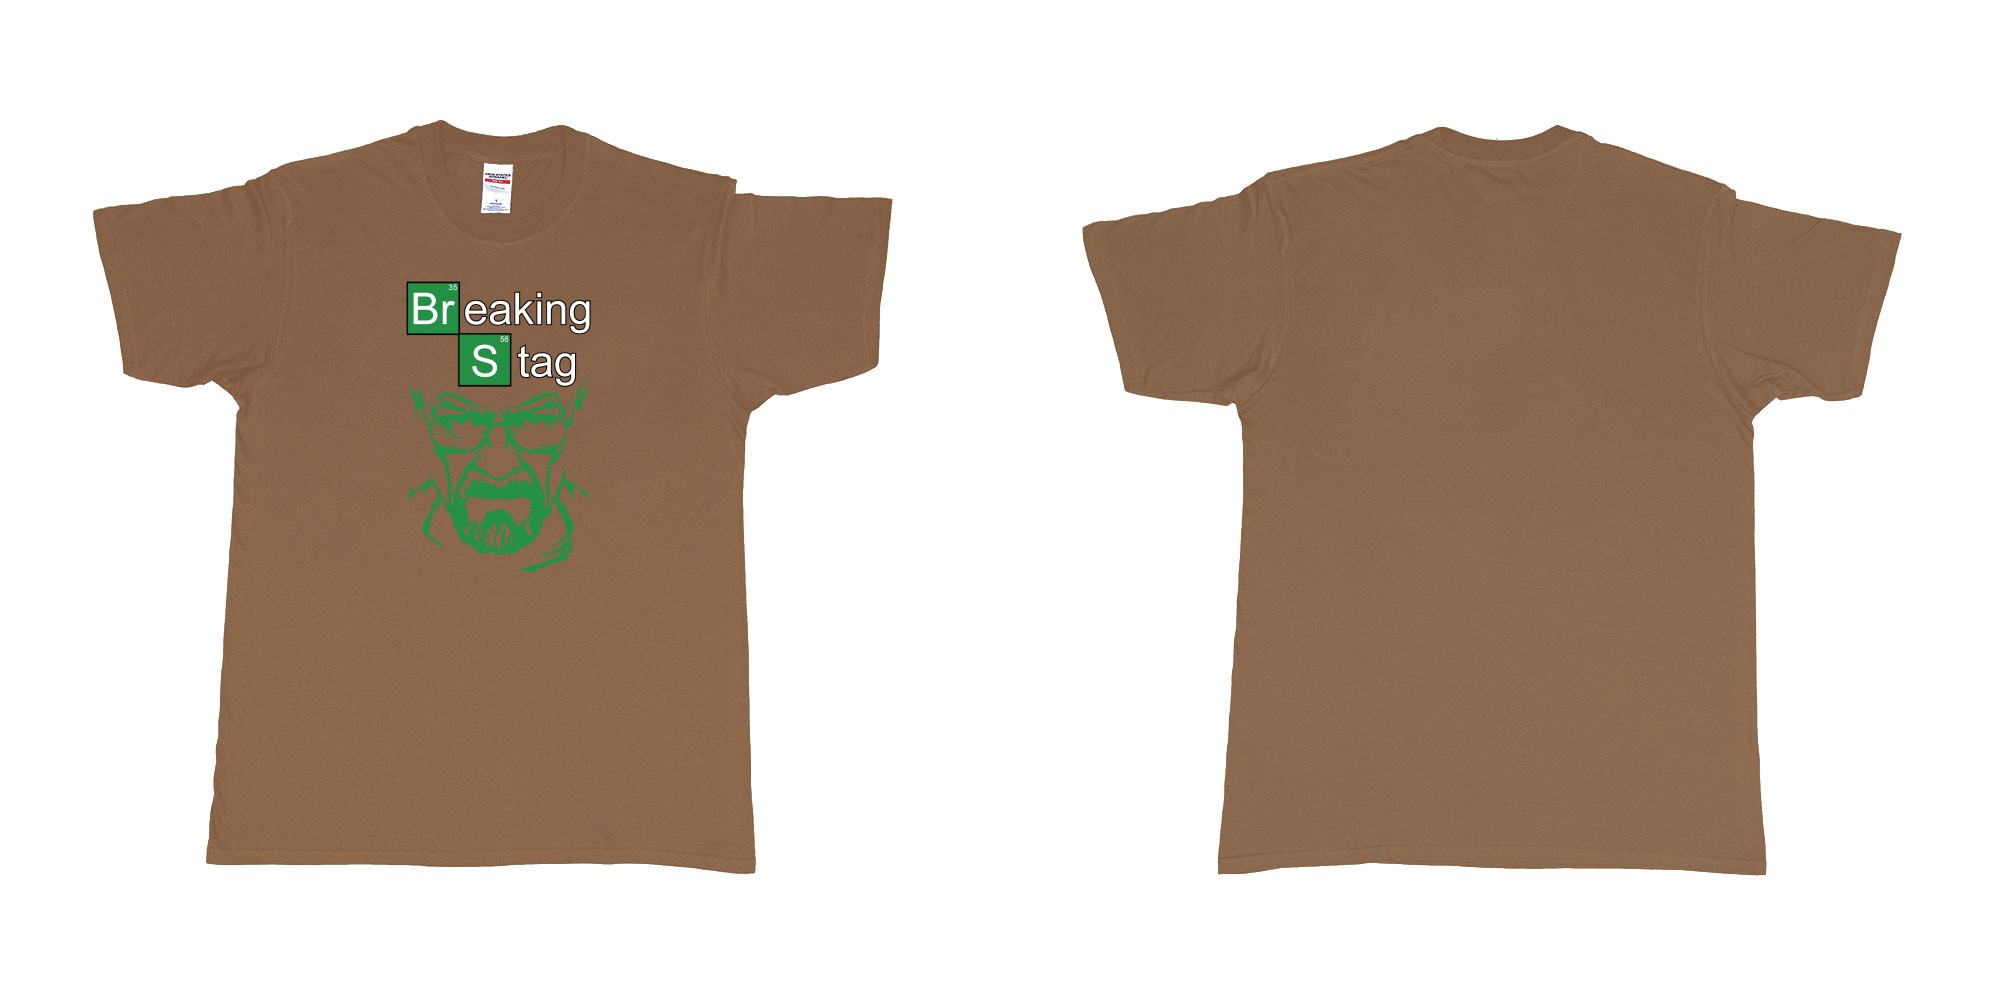 Custom tshirt design TPW Braking Bad Stag in fabric color chestnut choice your own text made in Bali by The Pirate Way